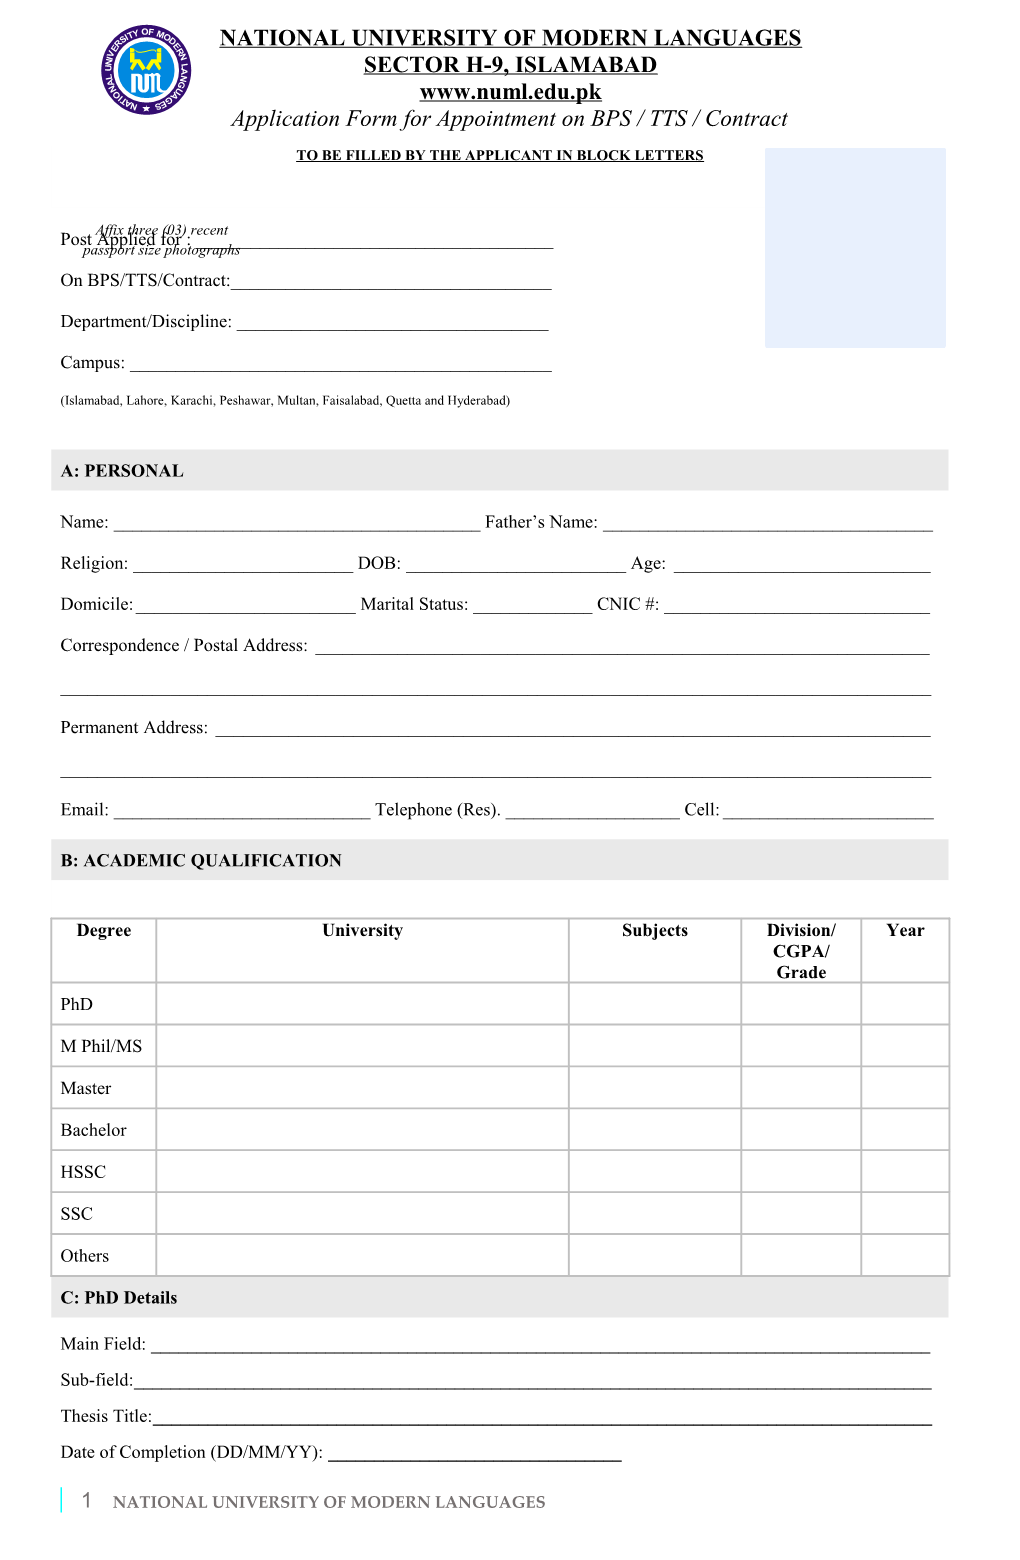 Application Form for Appointment on BPS / TTS / Contract